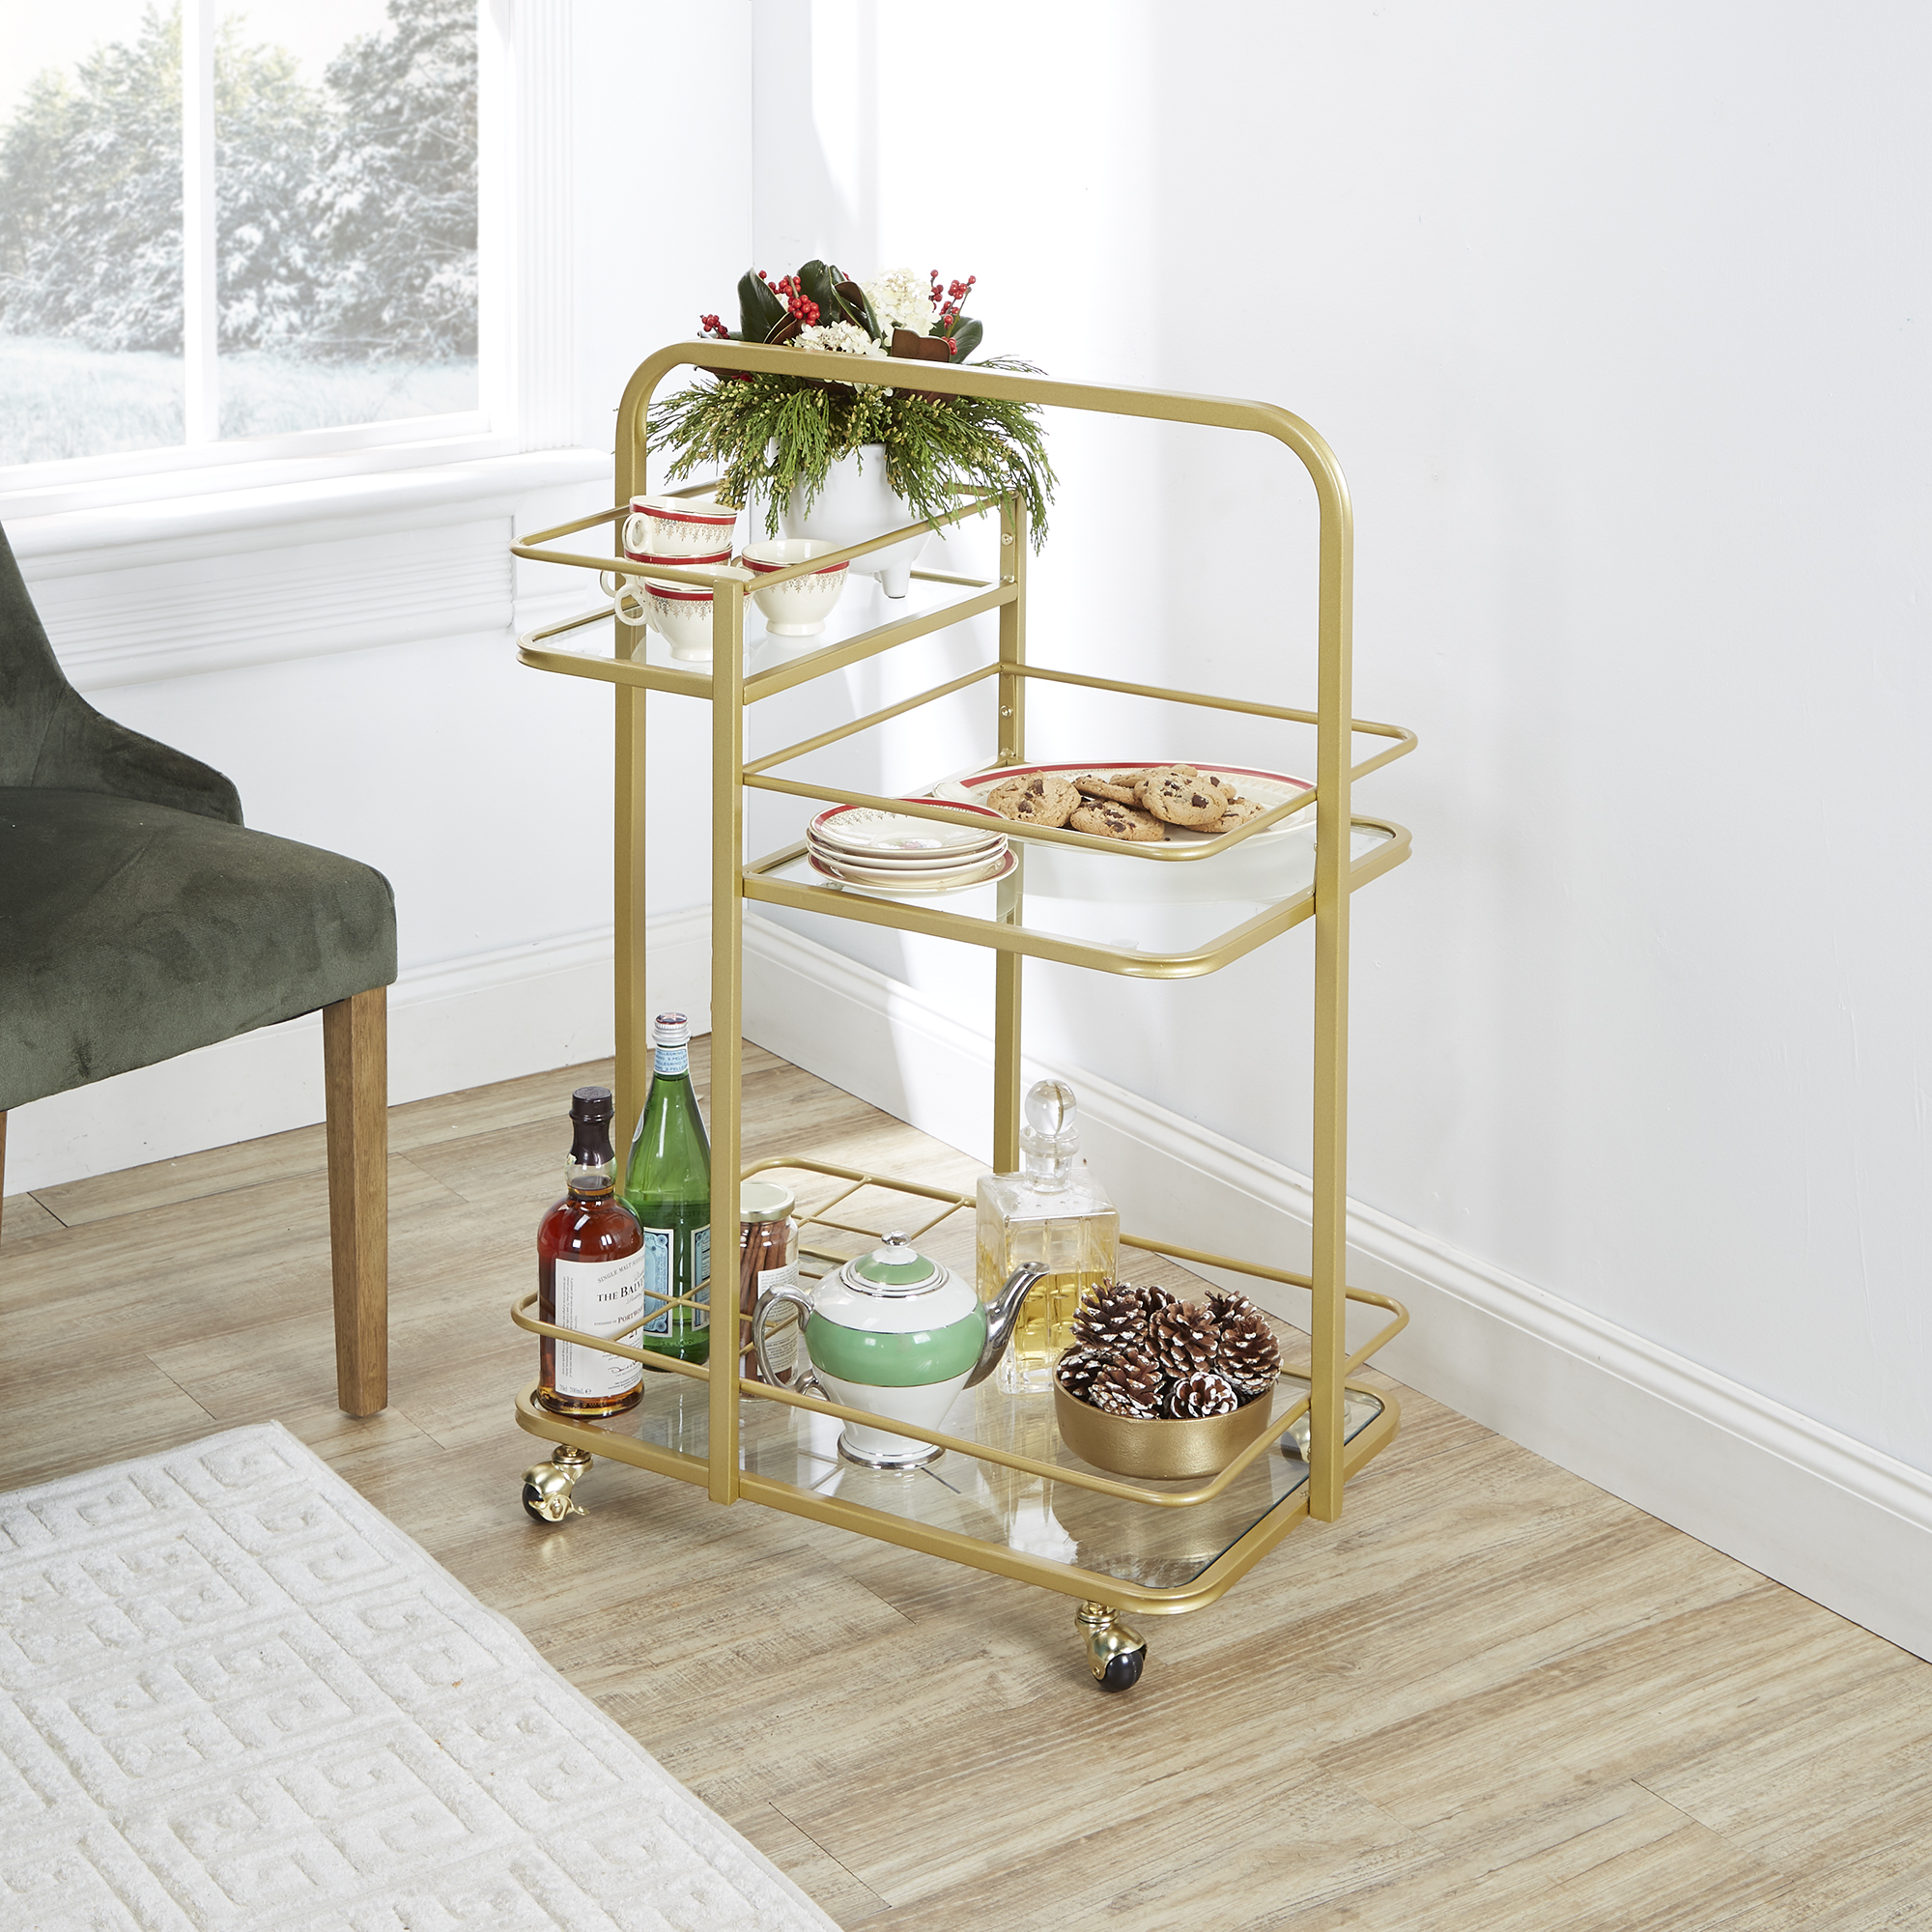 Adornments Gold Metal Serving Barcart with 3 Glass Shelves - image 1 of 6